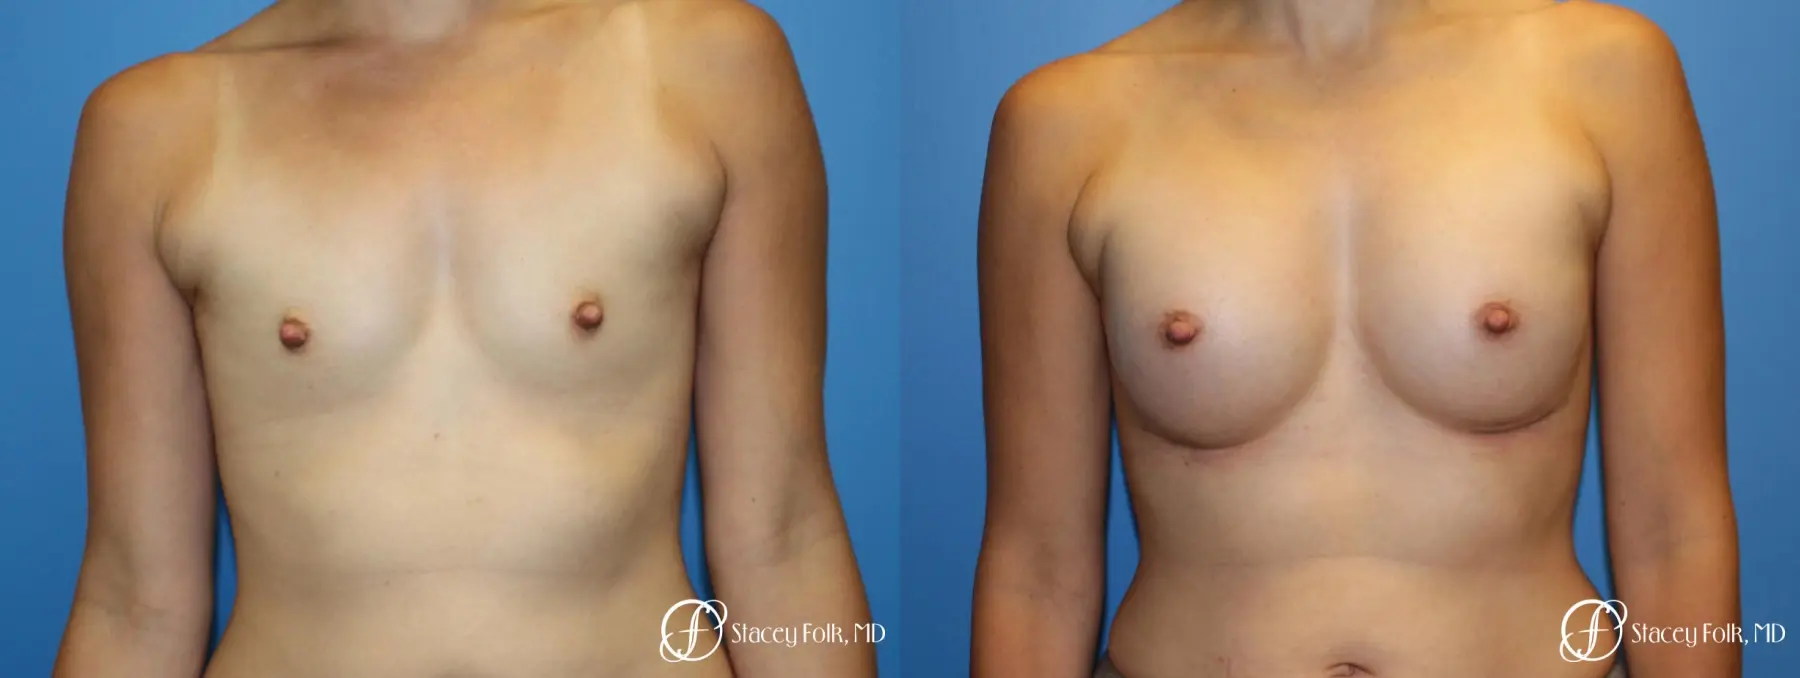 Denver Breast augmentation using textured anatomical implants 5849 - Before and After 1